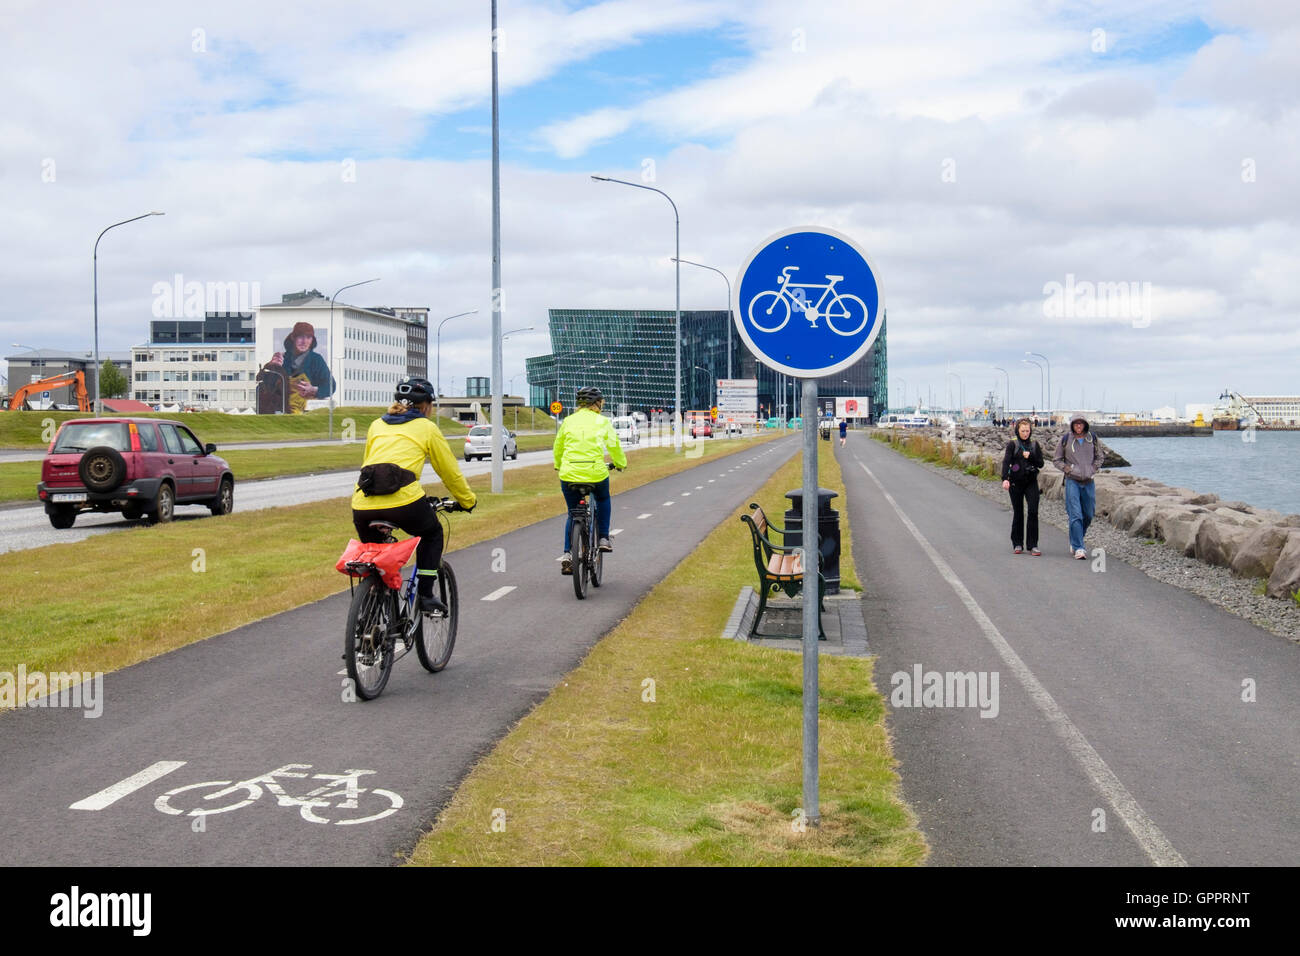 Cyclists riding on cycle track beside pedestrian footway with bicycle sign on the waterfront promenade. Reykjavik, Iceland Stock Photo